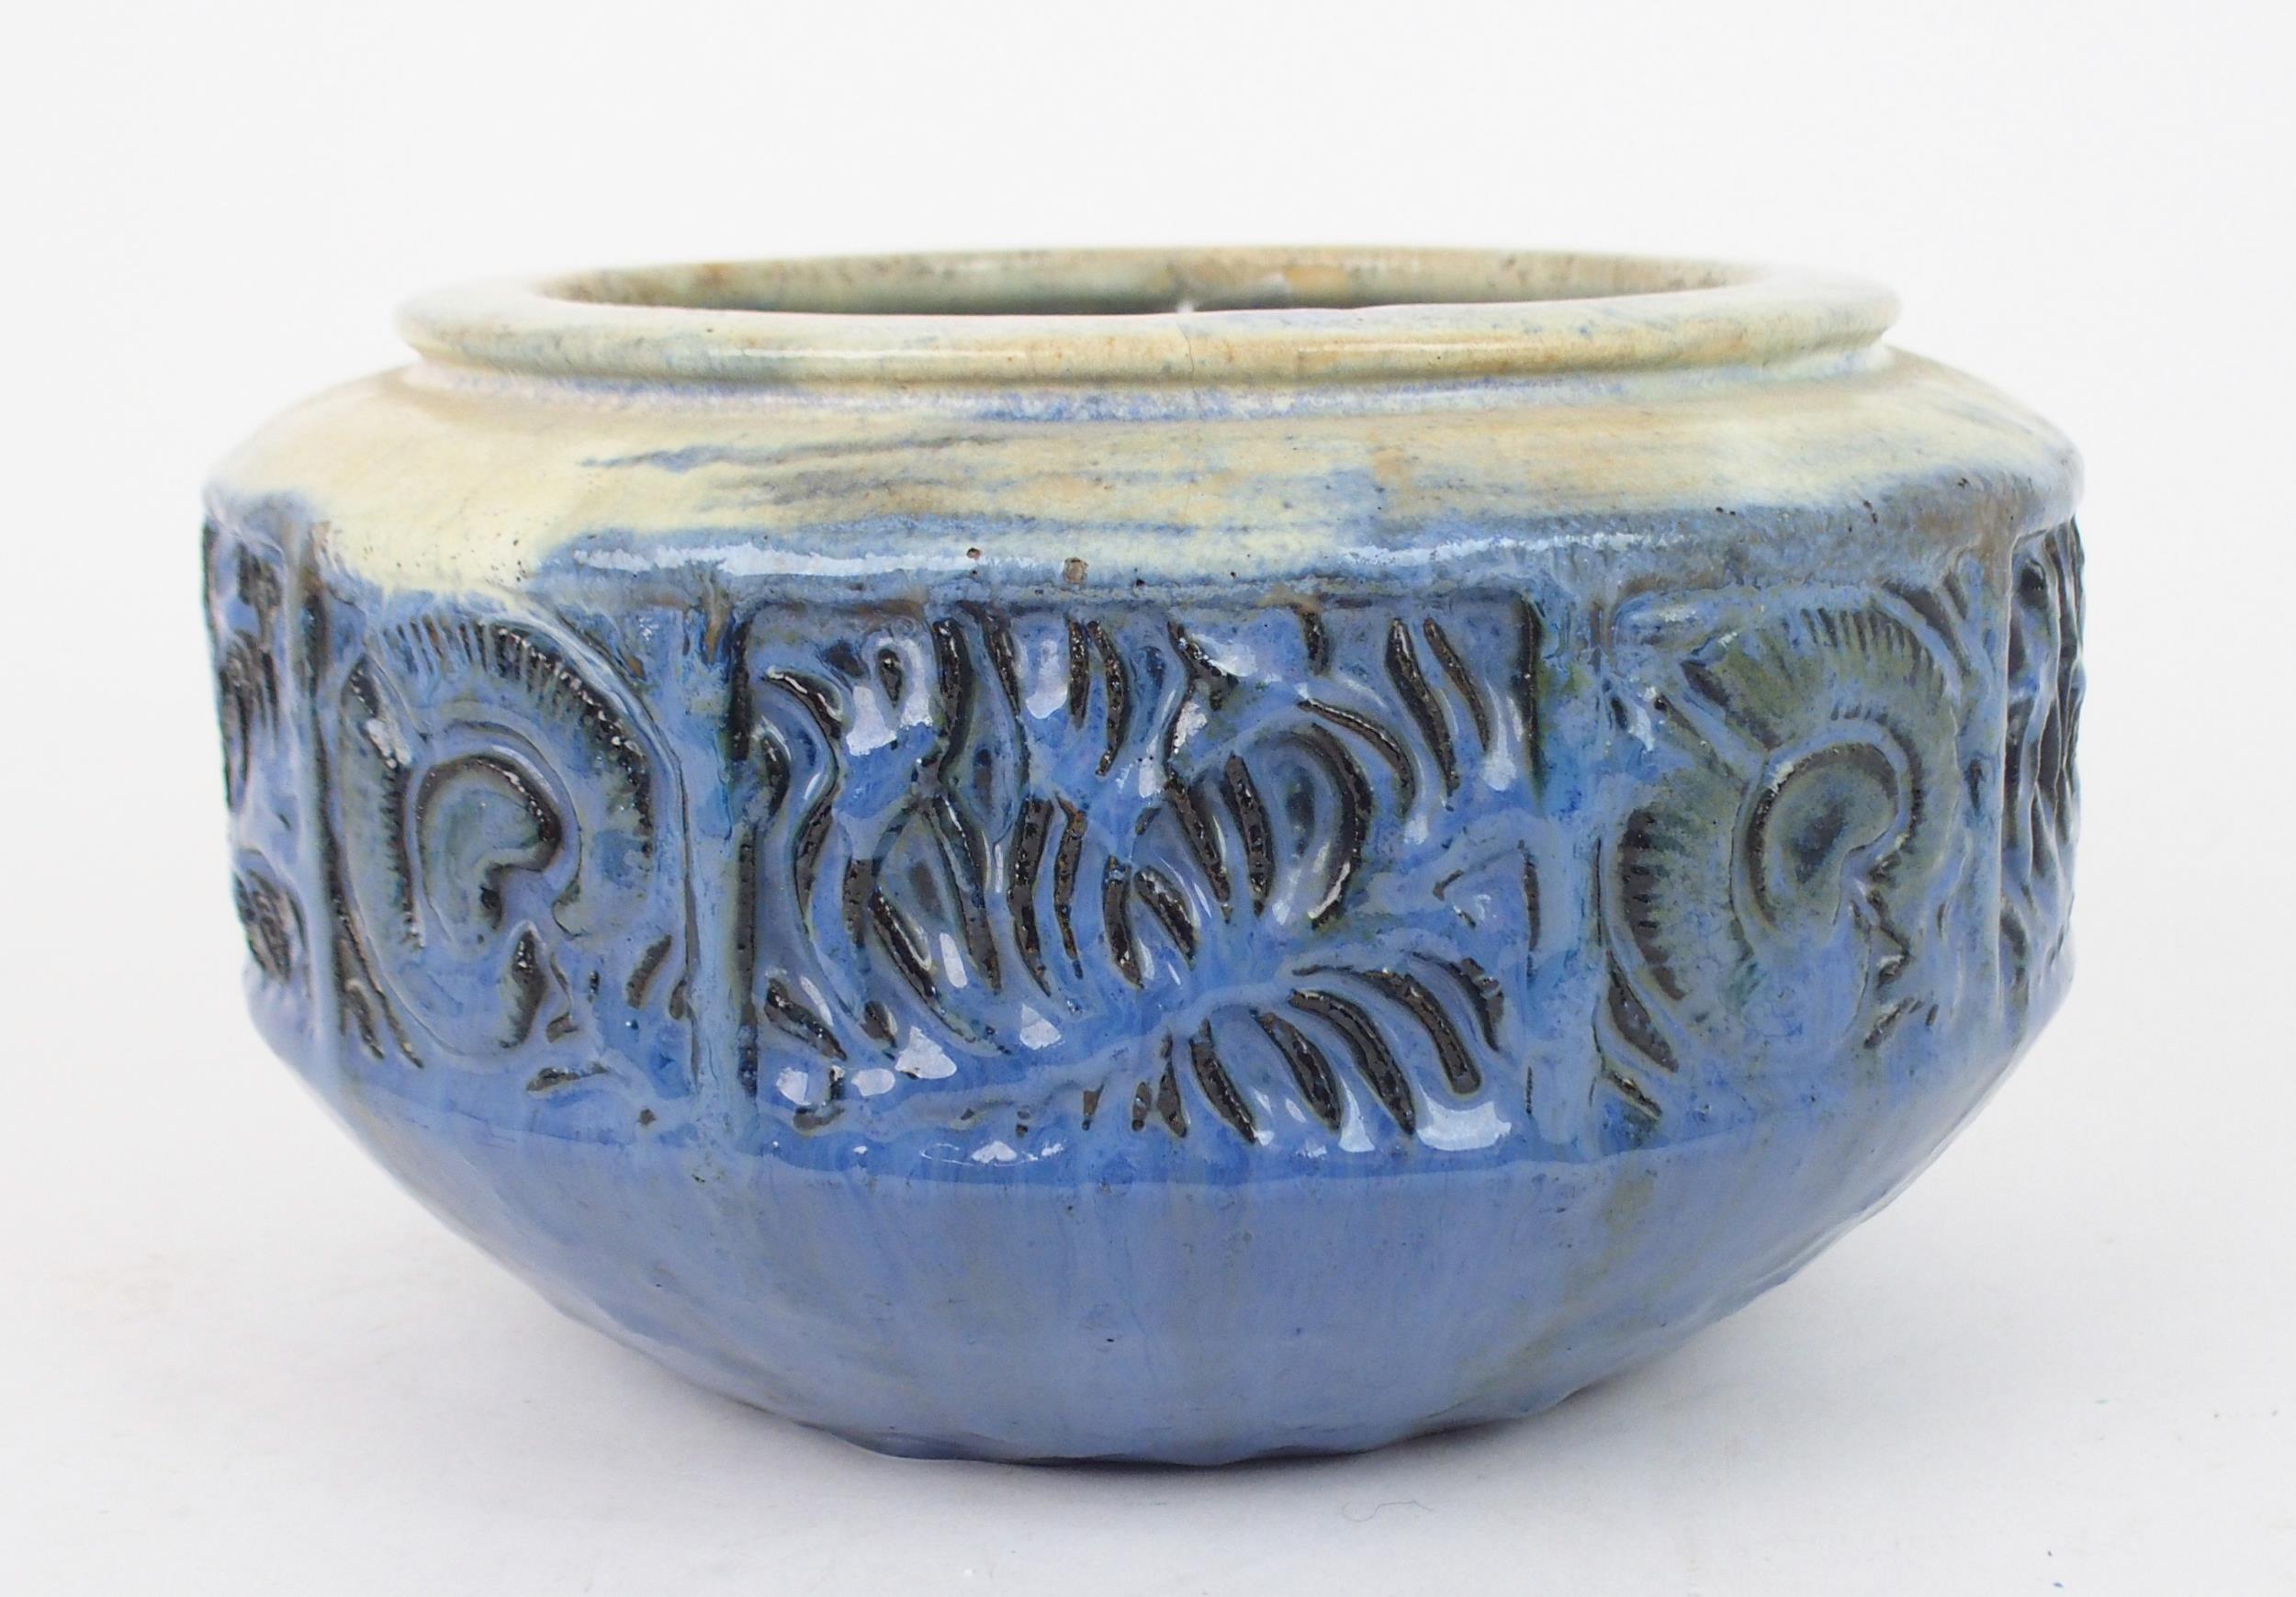 FULPER POTTERY, USA BOWL circa 1920, with peacock feather decoration in blue glaze, 25cm diameter - Image 3 of 5